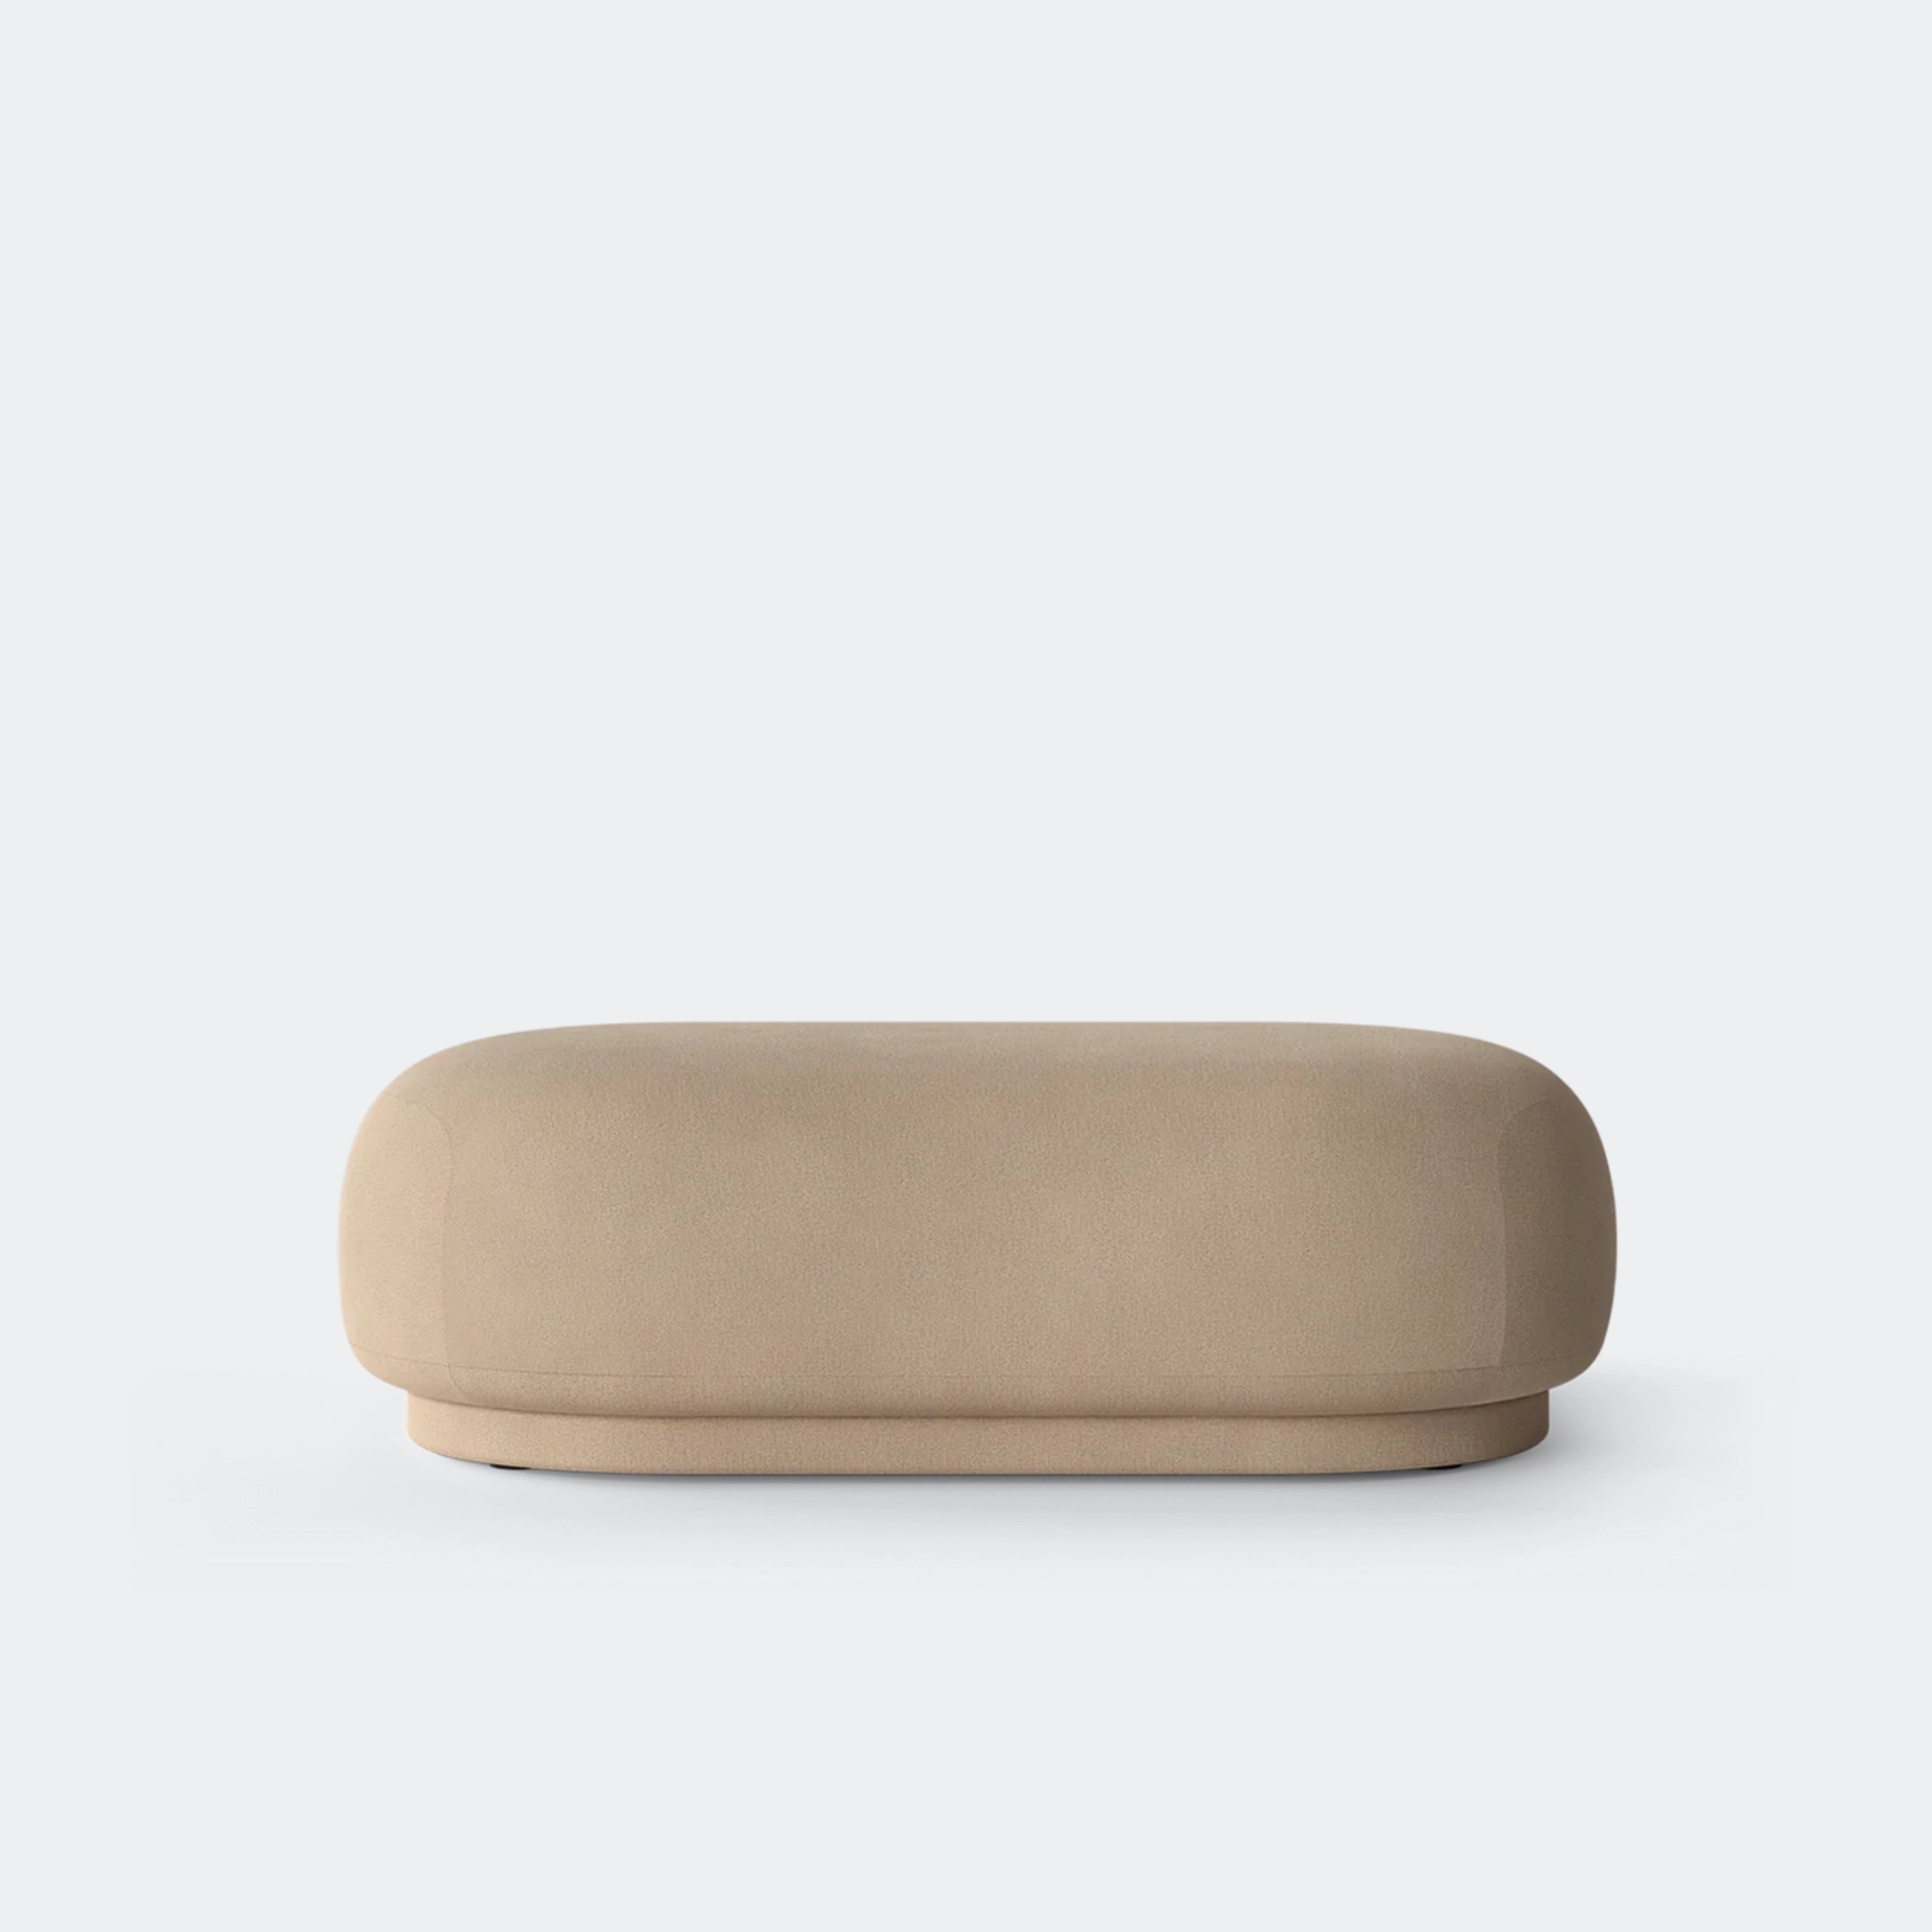 Ferm Living Rico Ottoman Made To Order (12-14 Weeks) Brushed, Sand - KANSO#Fabric_Brushed, Sand